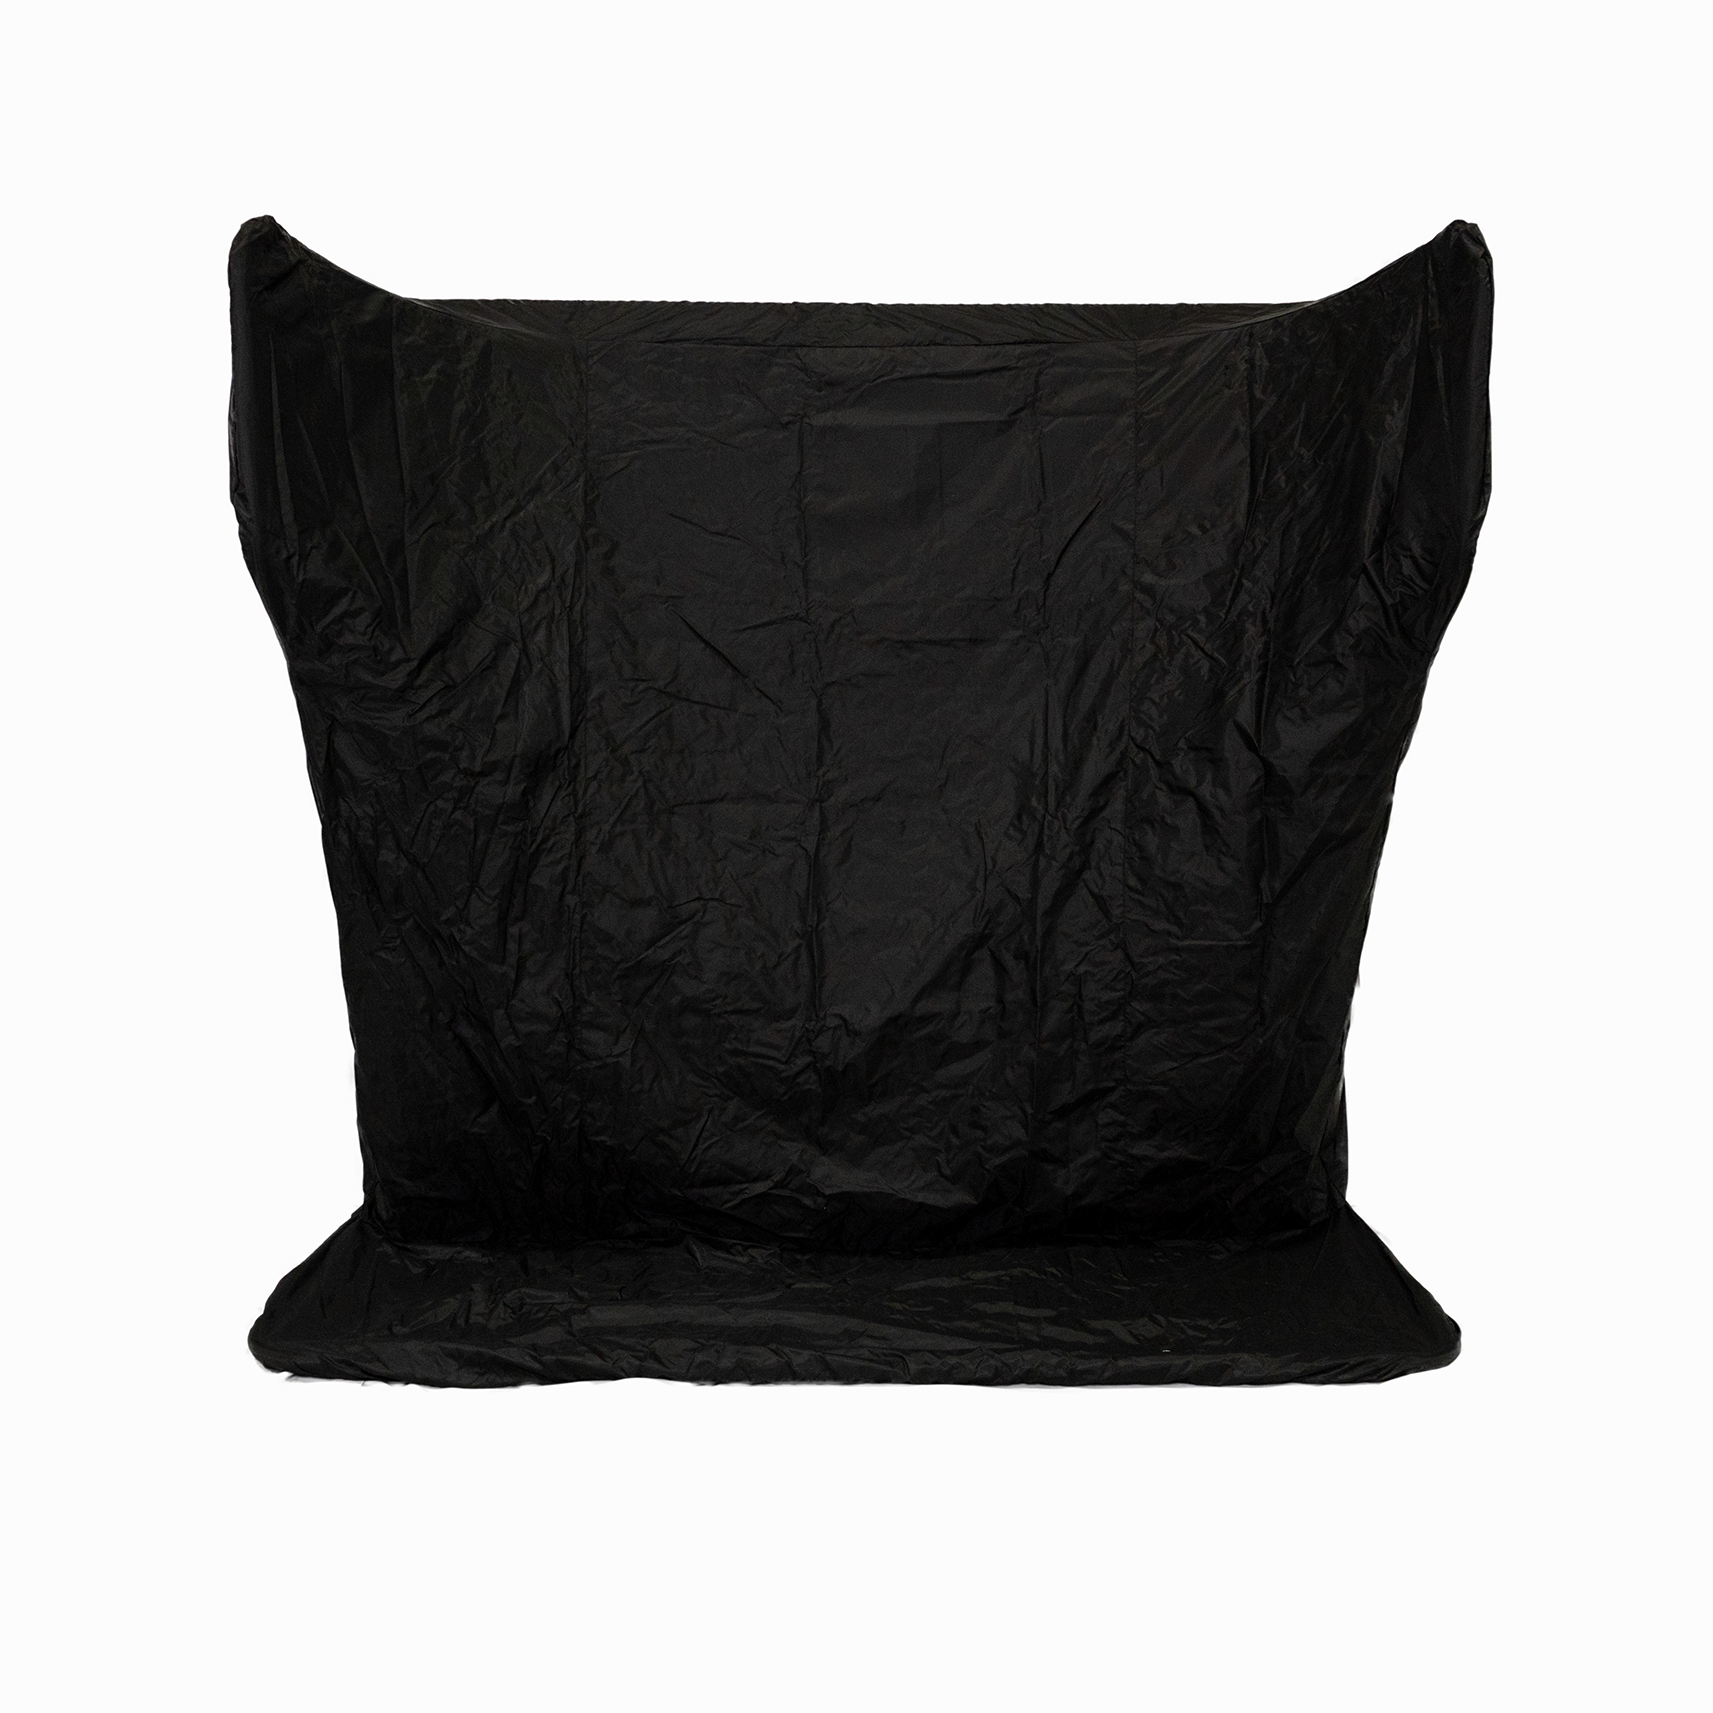 Pro Series V2 Large-8 Outdoor Cover